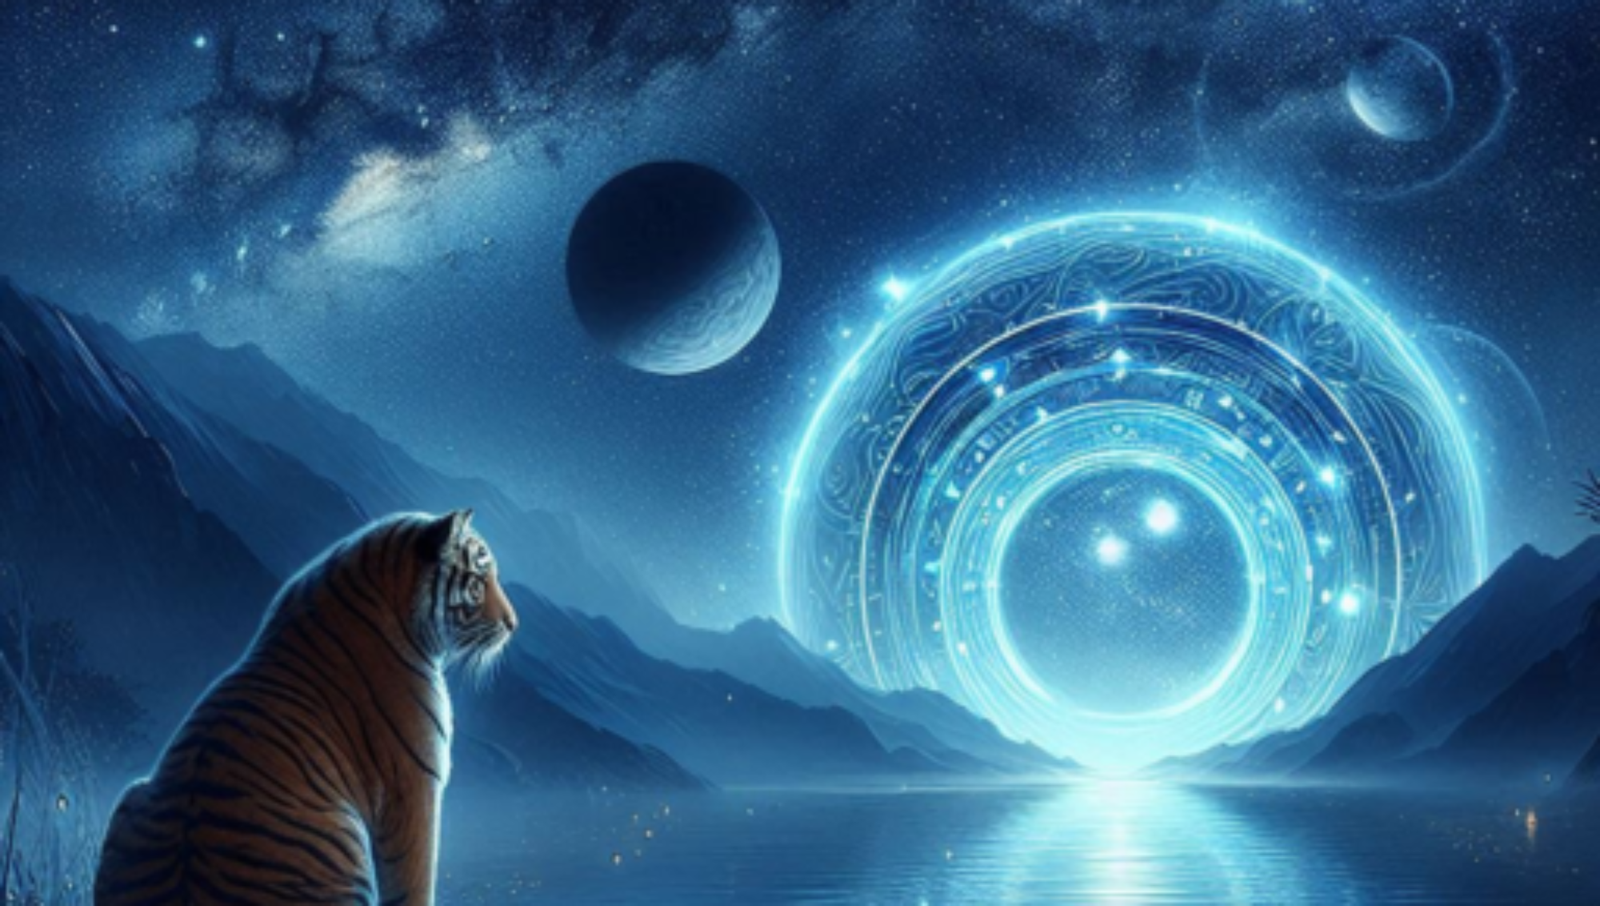 Tiger at night viewing cosmic portal over a river